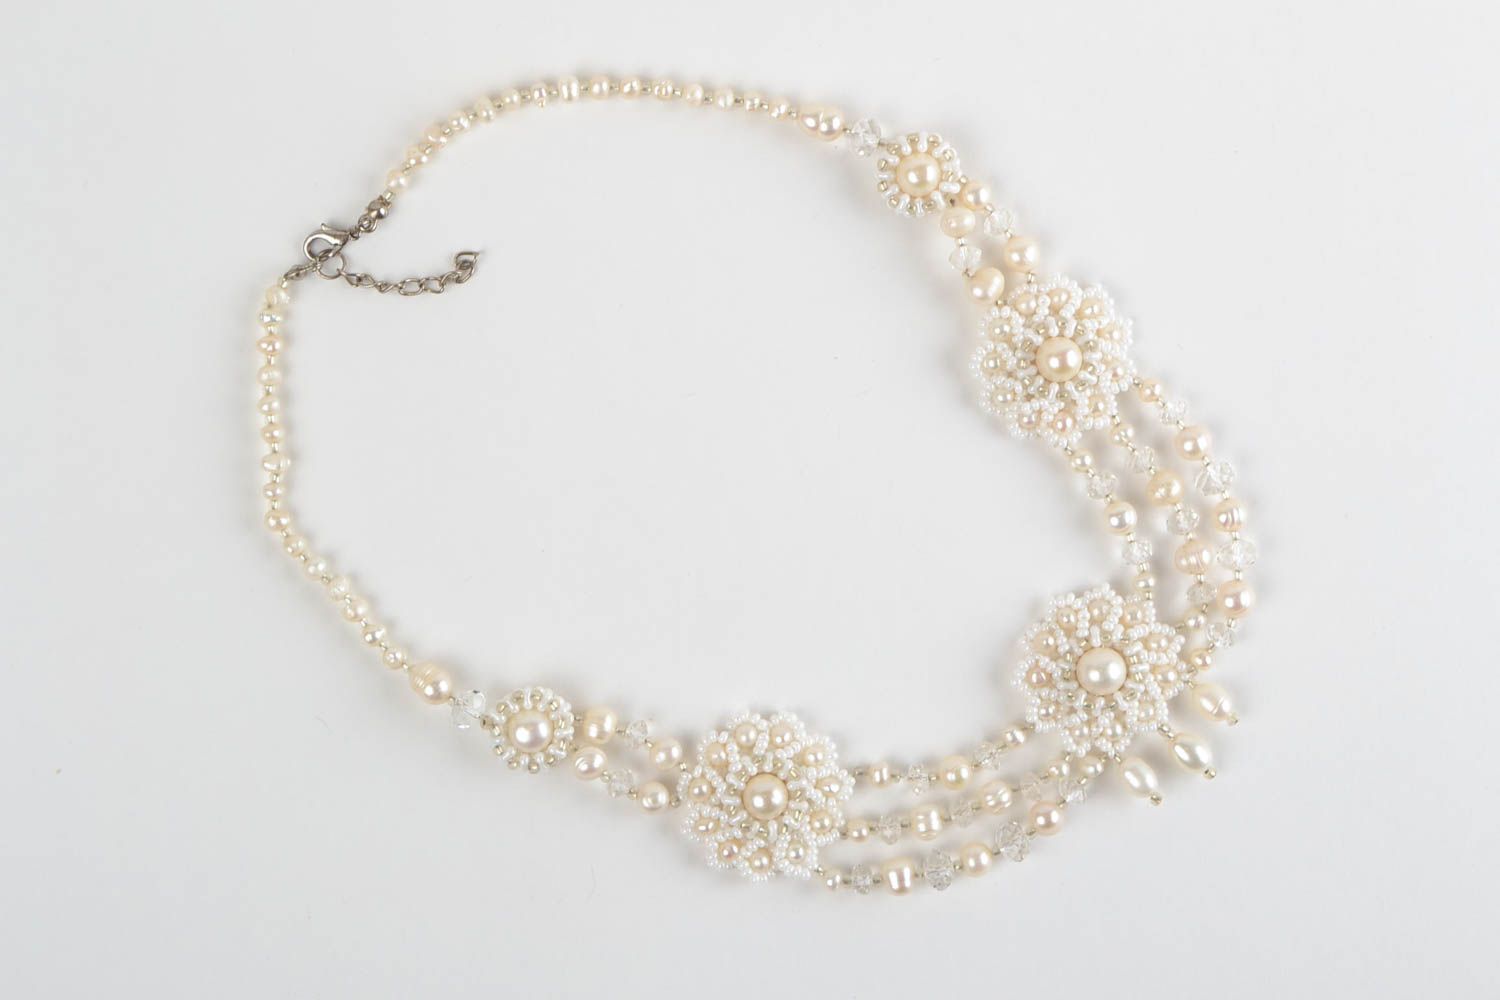 Beautiful festive handmade white necklace made of beads and natural stones photo 2